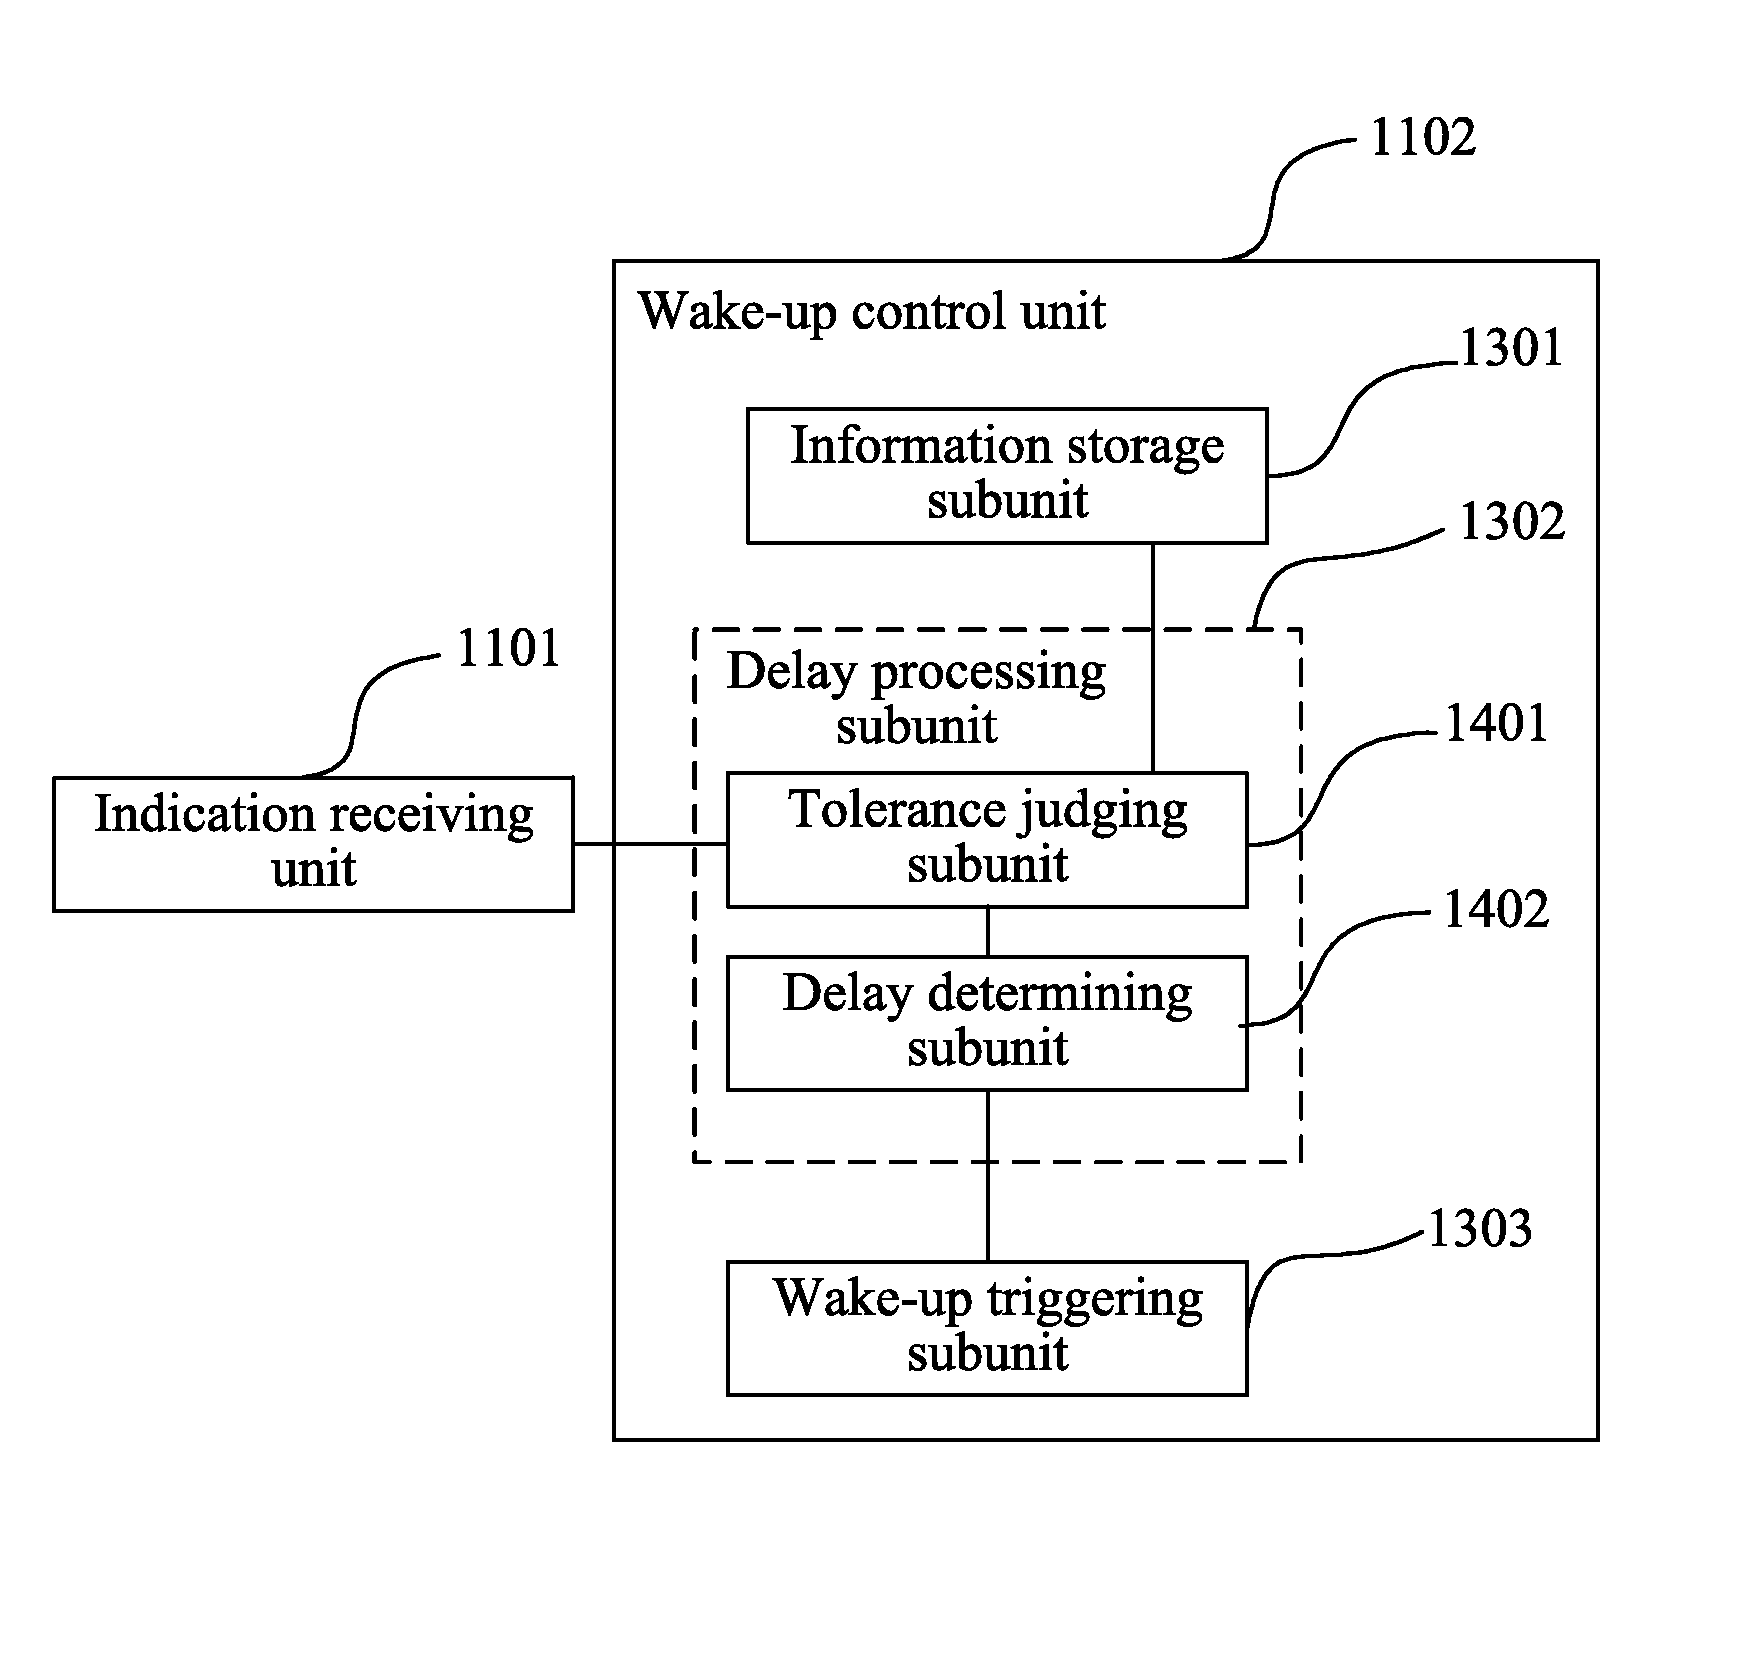 Method and apparatus for wake-up control of intelligent terminal by determining whether to delay wake up times